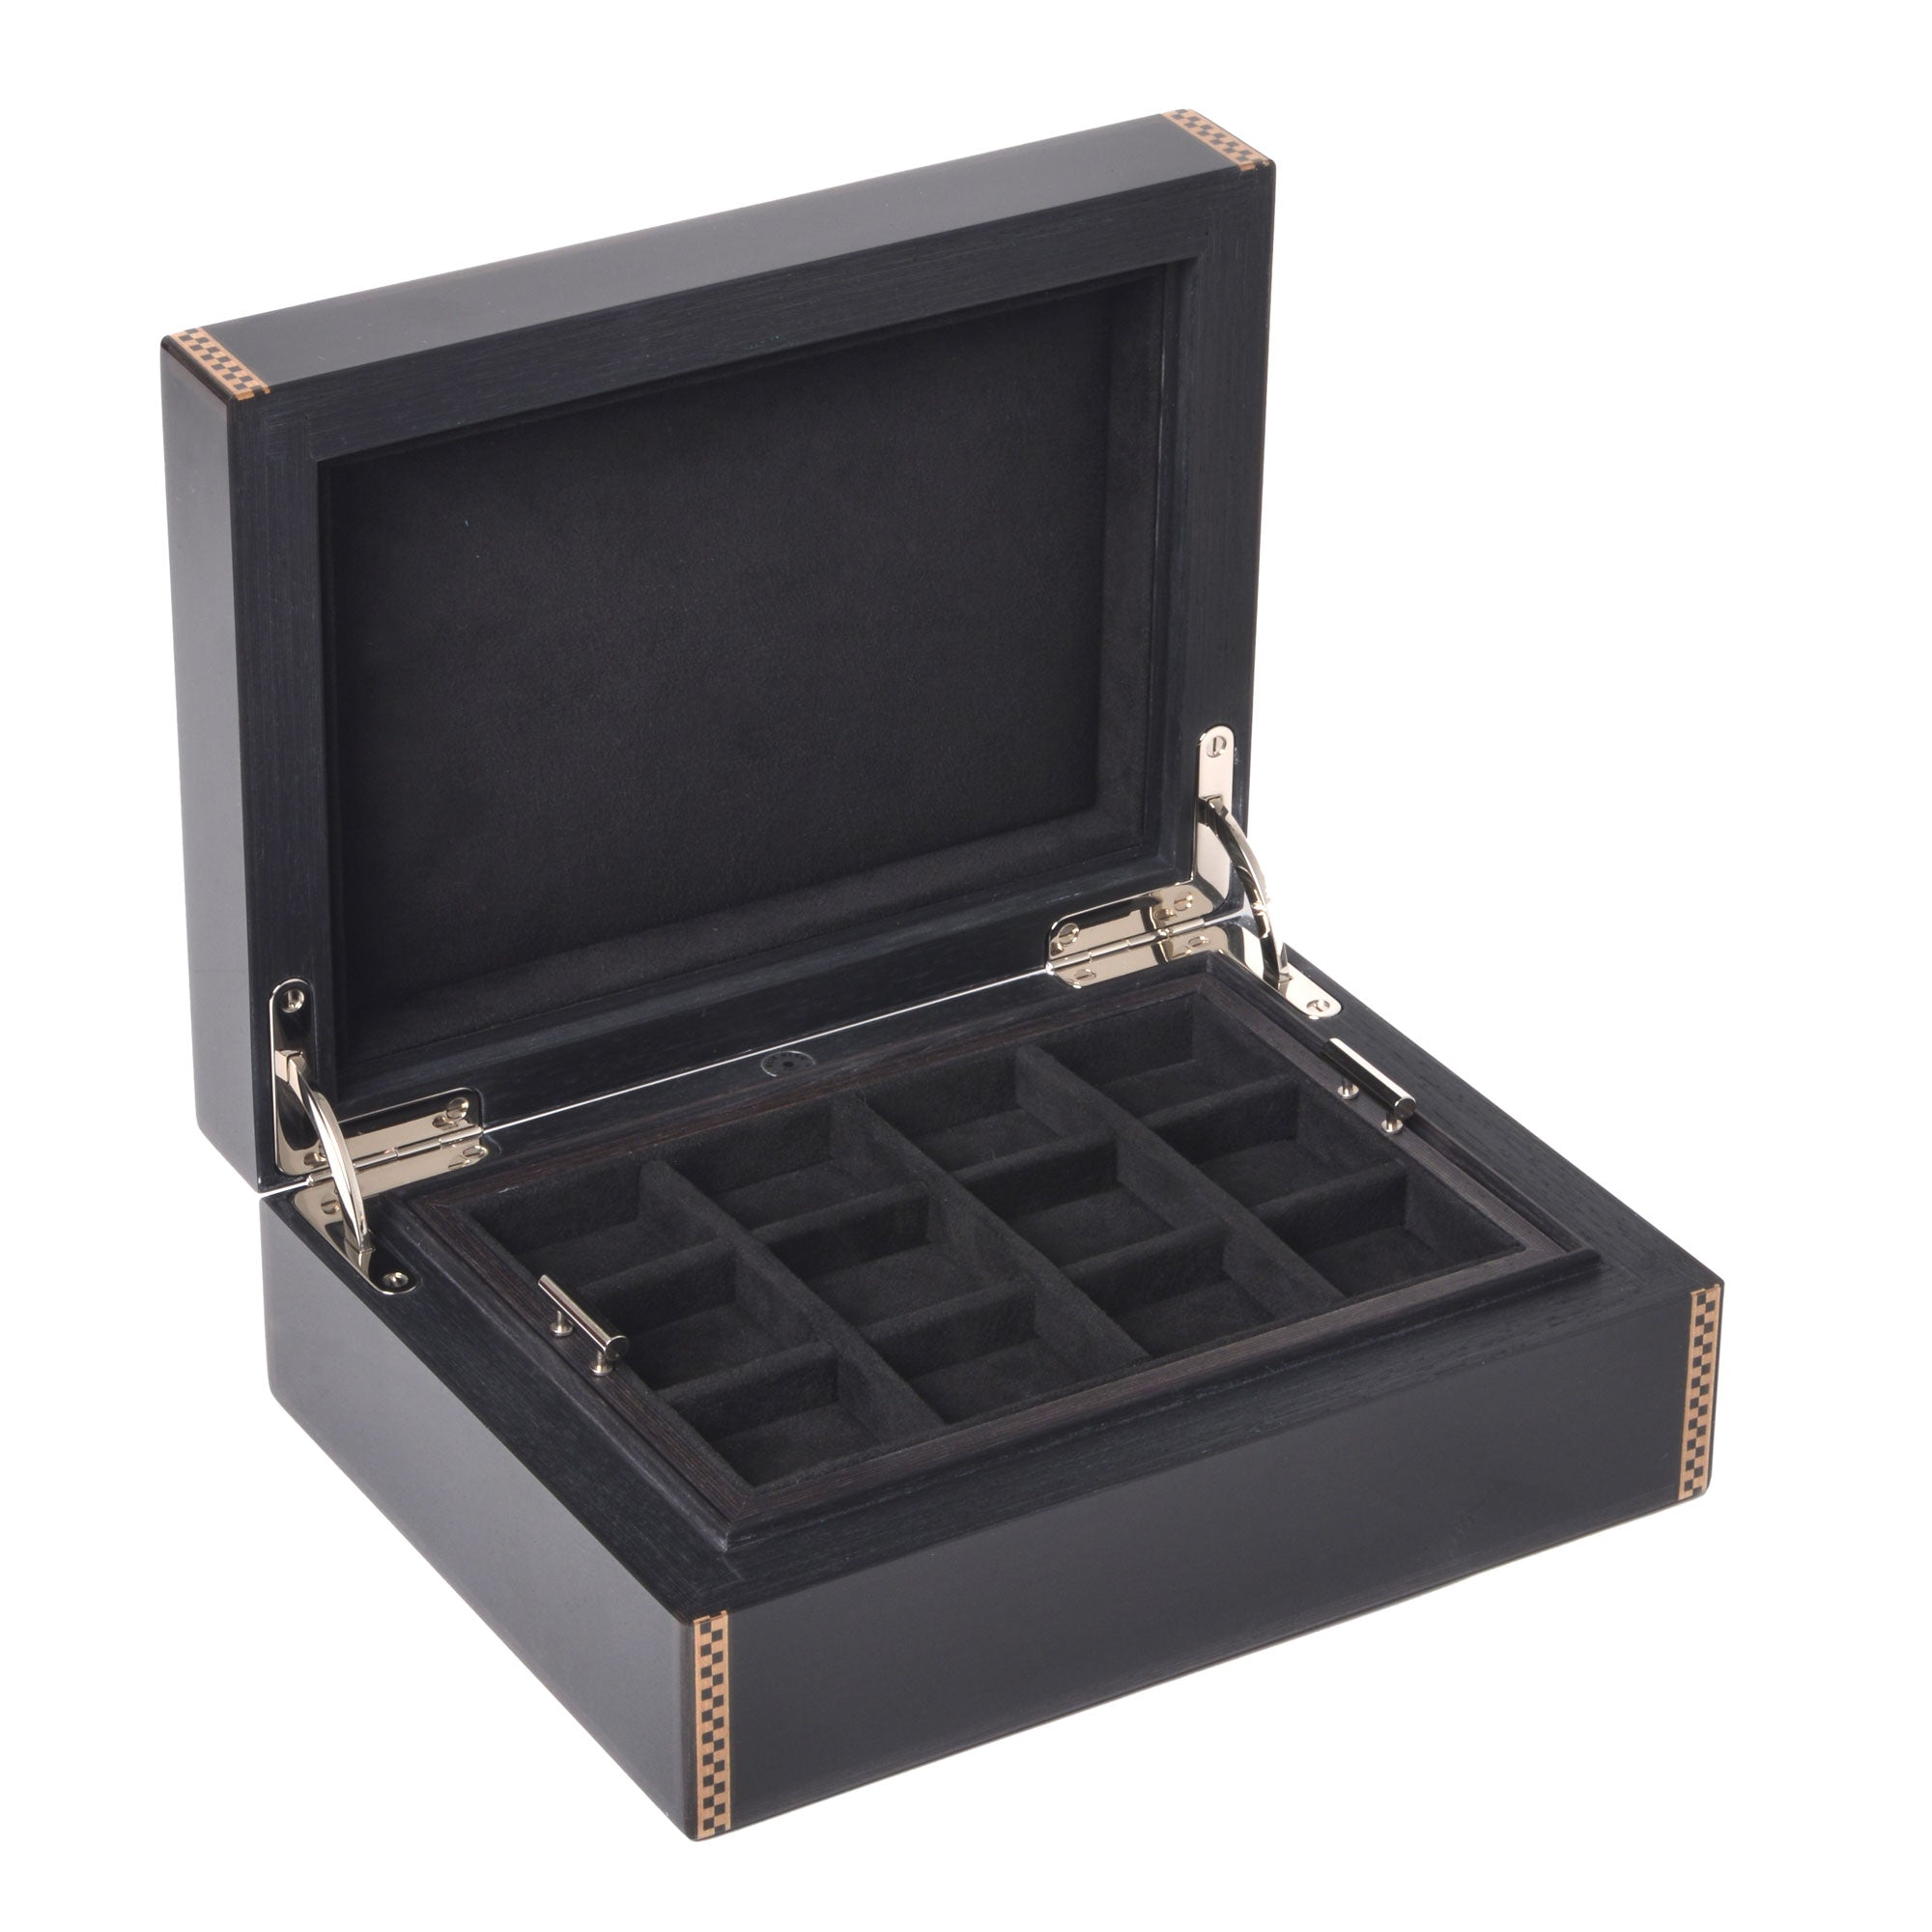 "Classic" - Box of 24 rings or 24 pairs of cufflinks